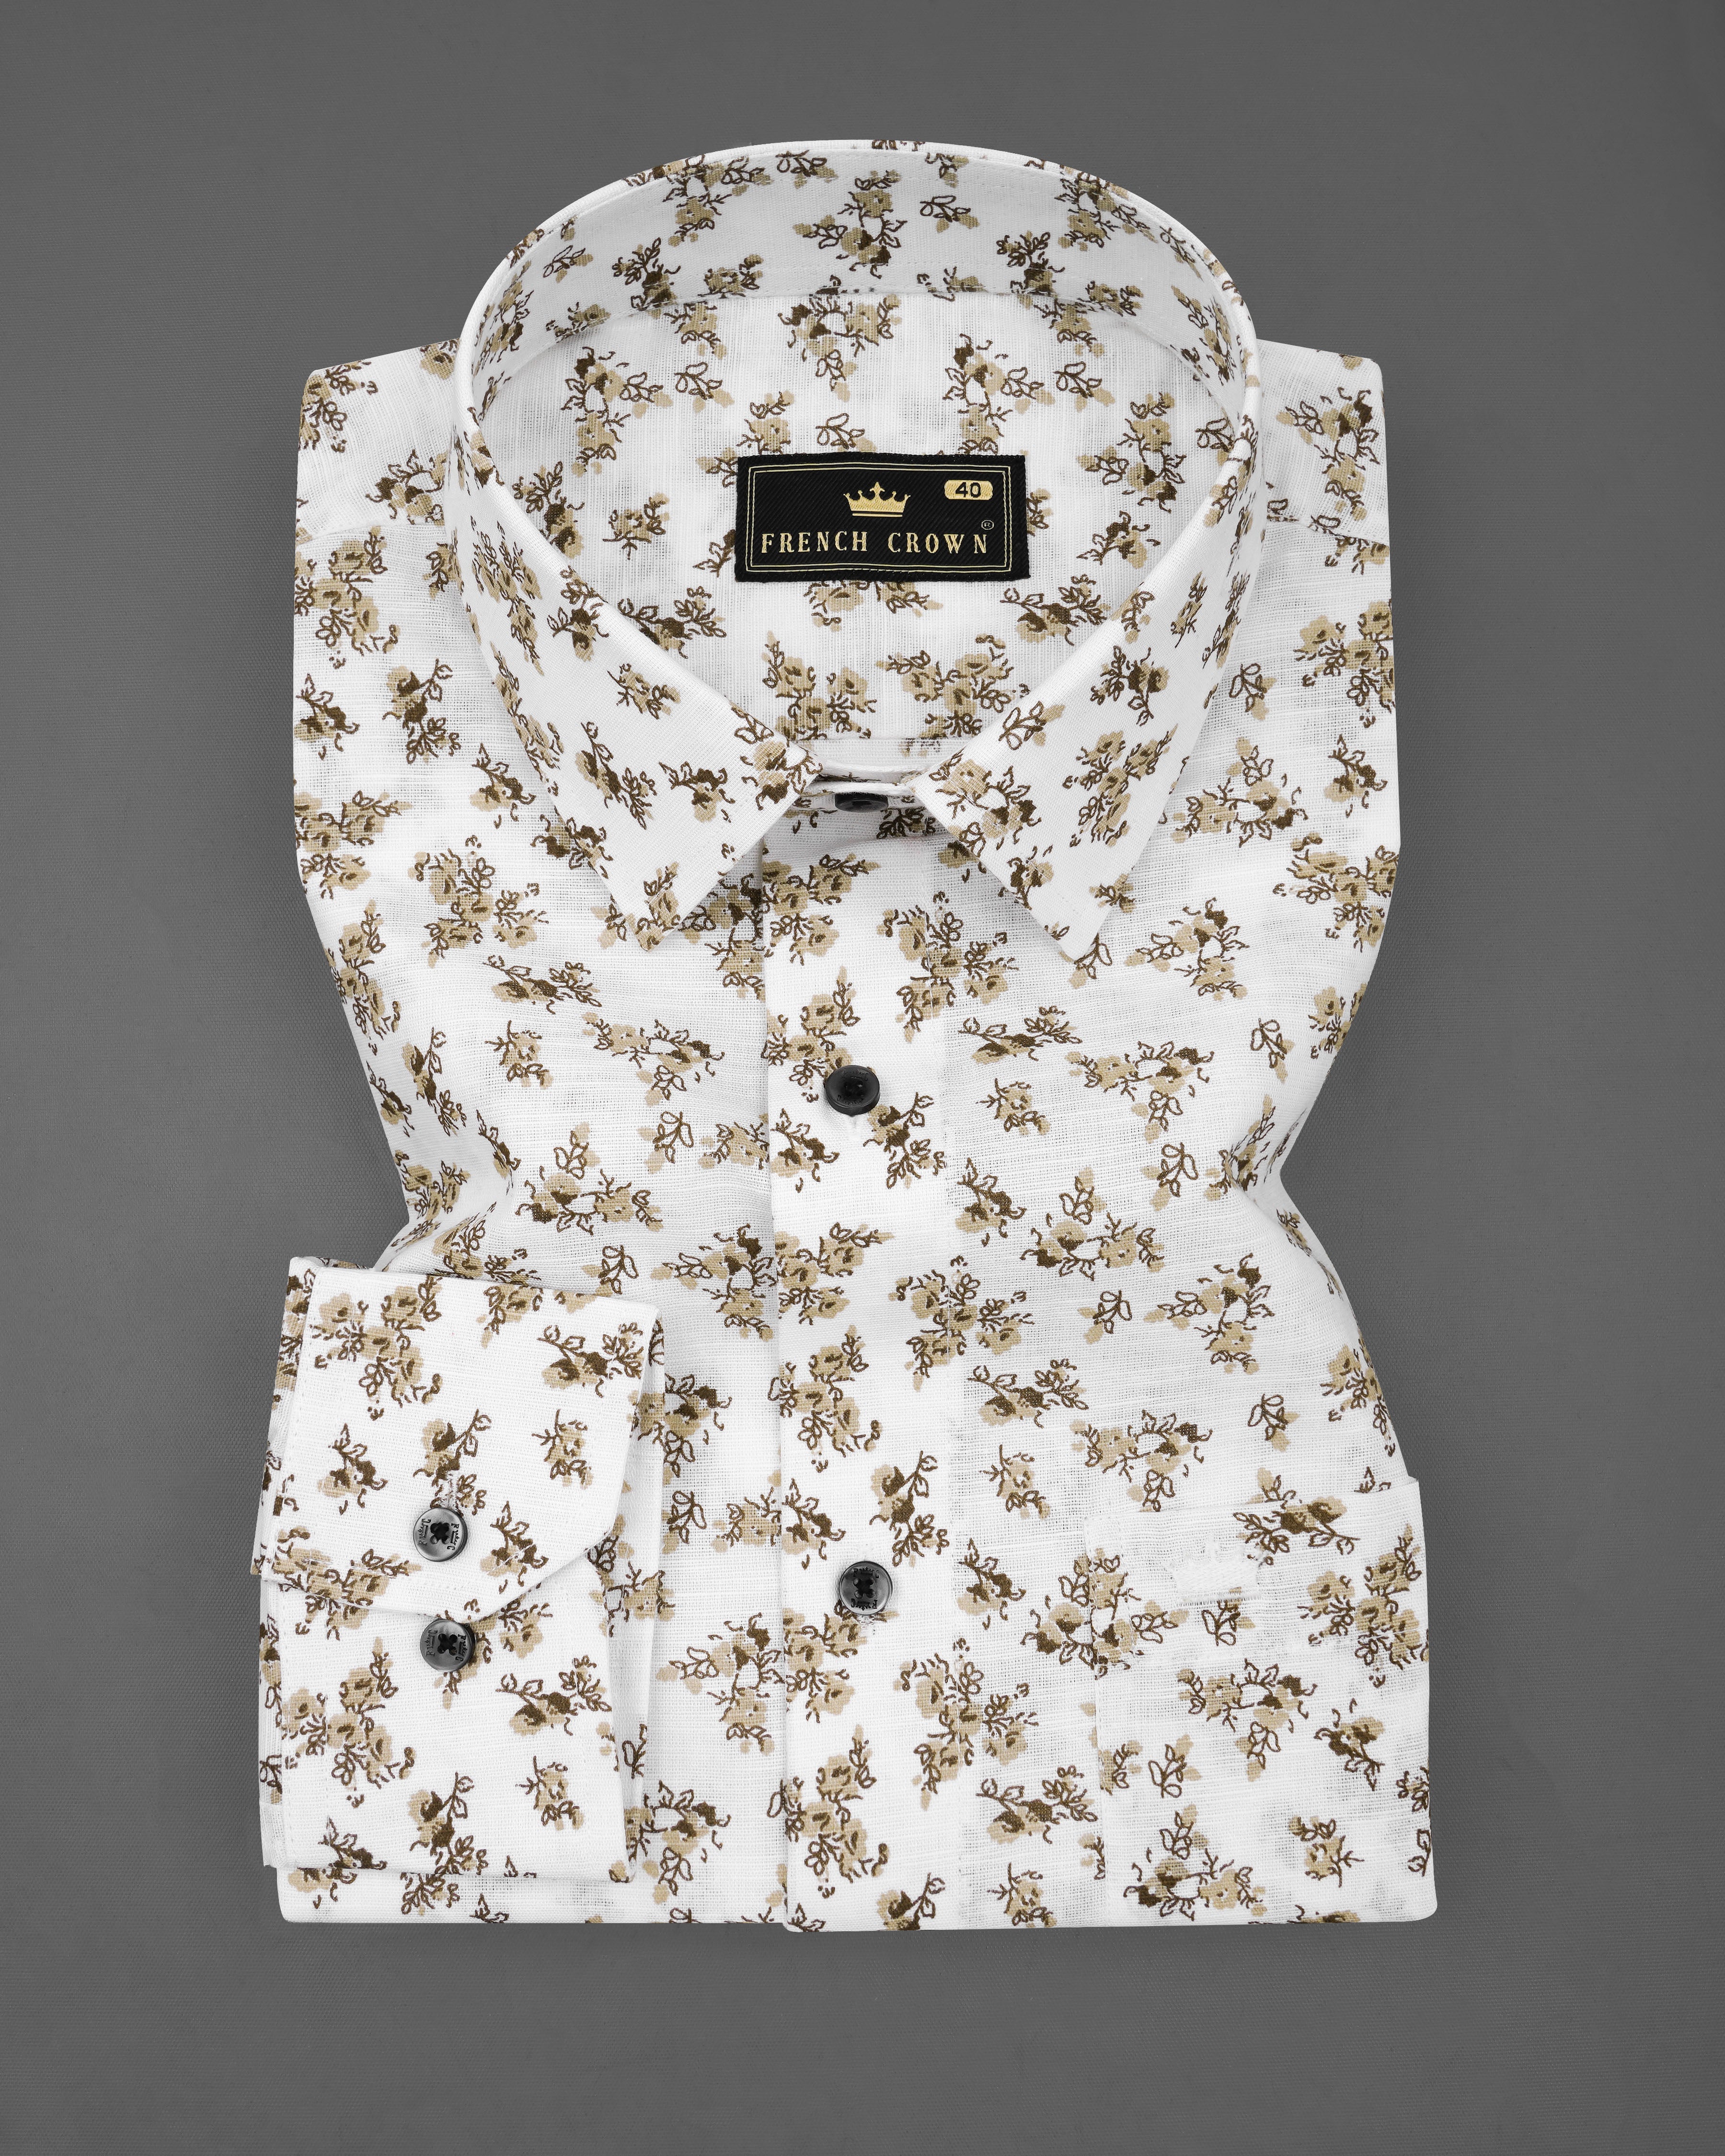 Amour White with Medium Taupe Brown Ditsy Printed Luxurious Linen Shirt 8273-BLK-38, 8273-BLK-H-38, 8273-BLK-39, 8273-BLK-H-39, 8273-BLK-40, 8273-BLK-H-40, 8273-BLK-42, 8273-BLK-H-42, 8273-BLK-44, 8273-BLK-H-44, 8273-BLK-46, 8273-BLK-H-46, 8273-BLK-48, 8273-BLK-H-48, 8273-BLK-50, 8273-BLK-H-50, 8273-BLK-52, 8273-BLK-H-52